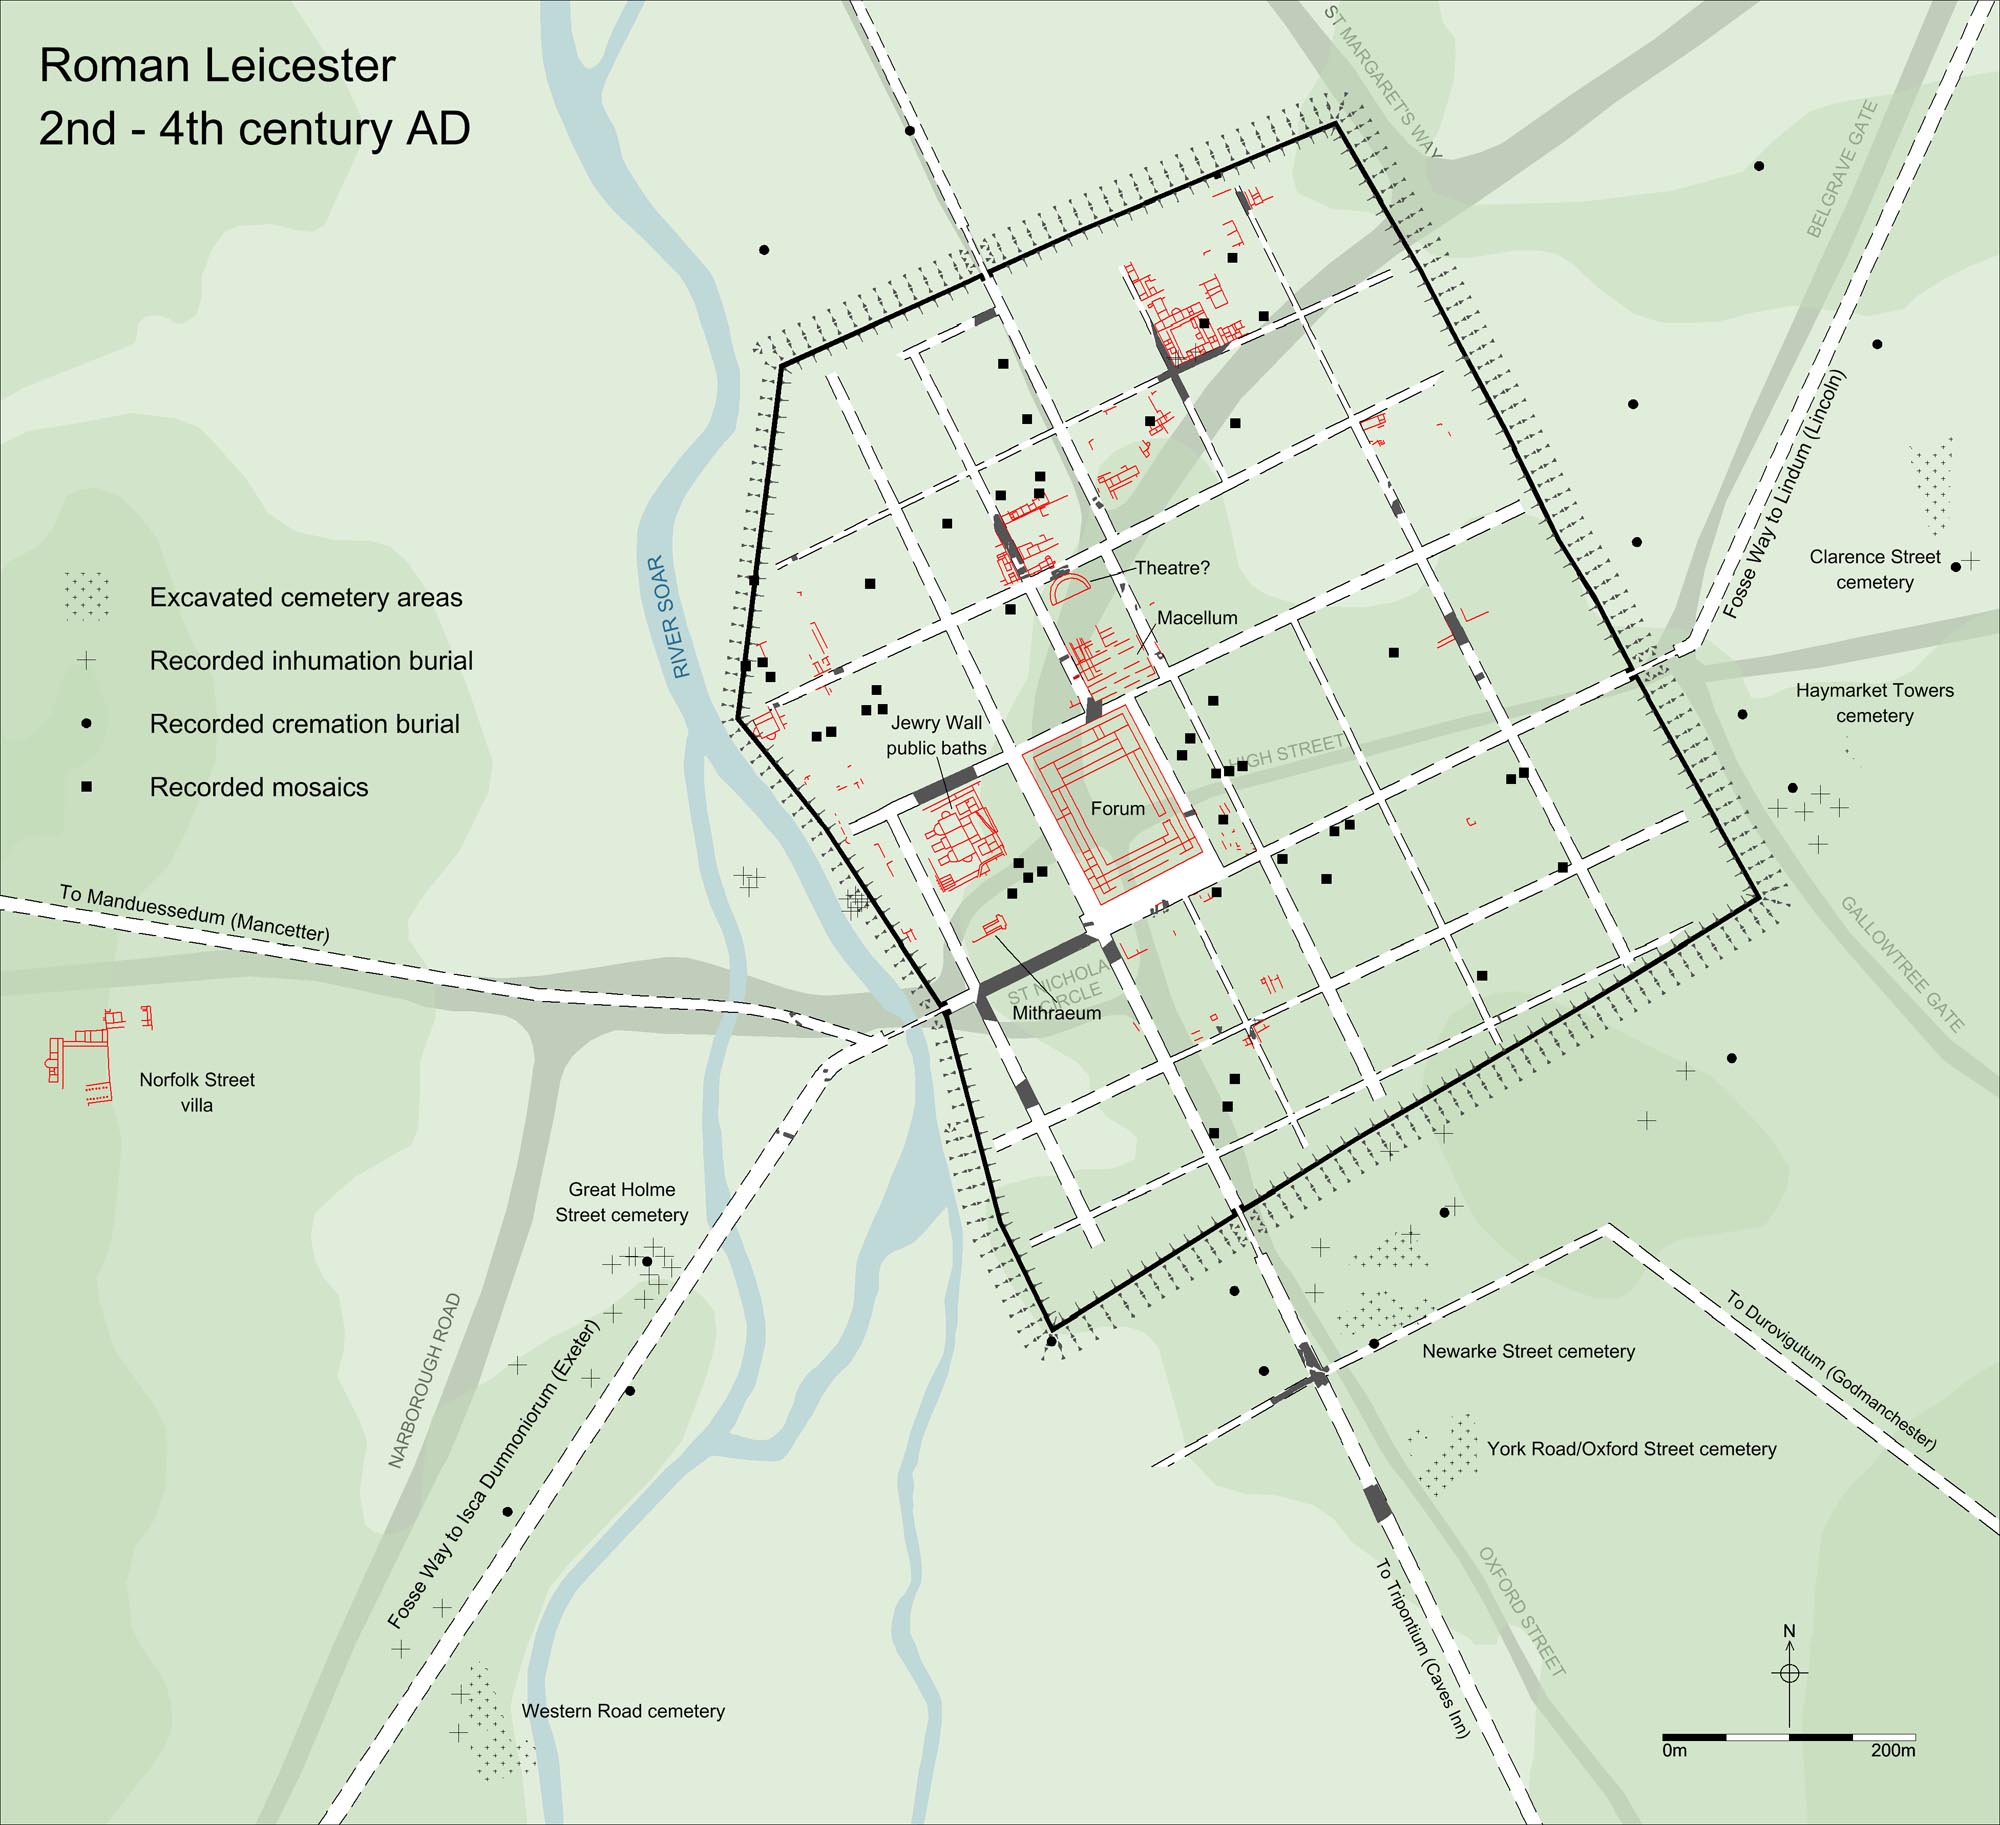 Plan of Roman Leicester - University of Leicester Archaeological Services